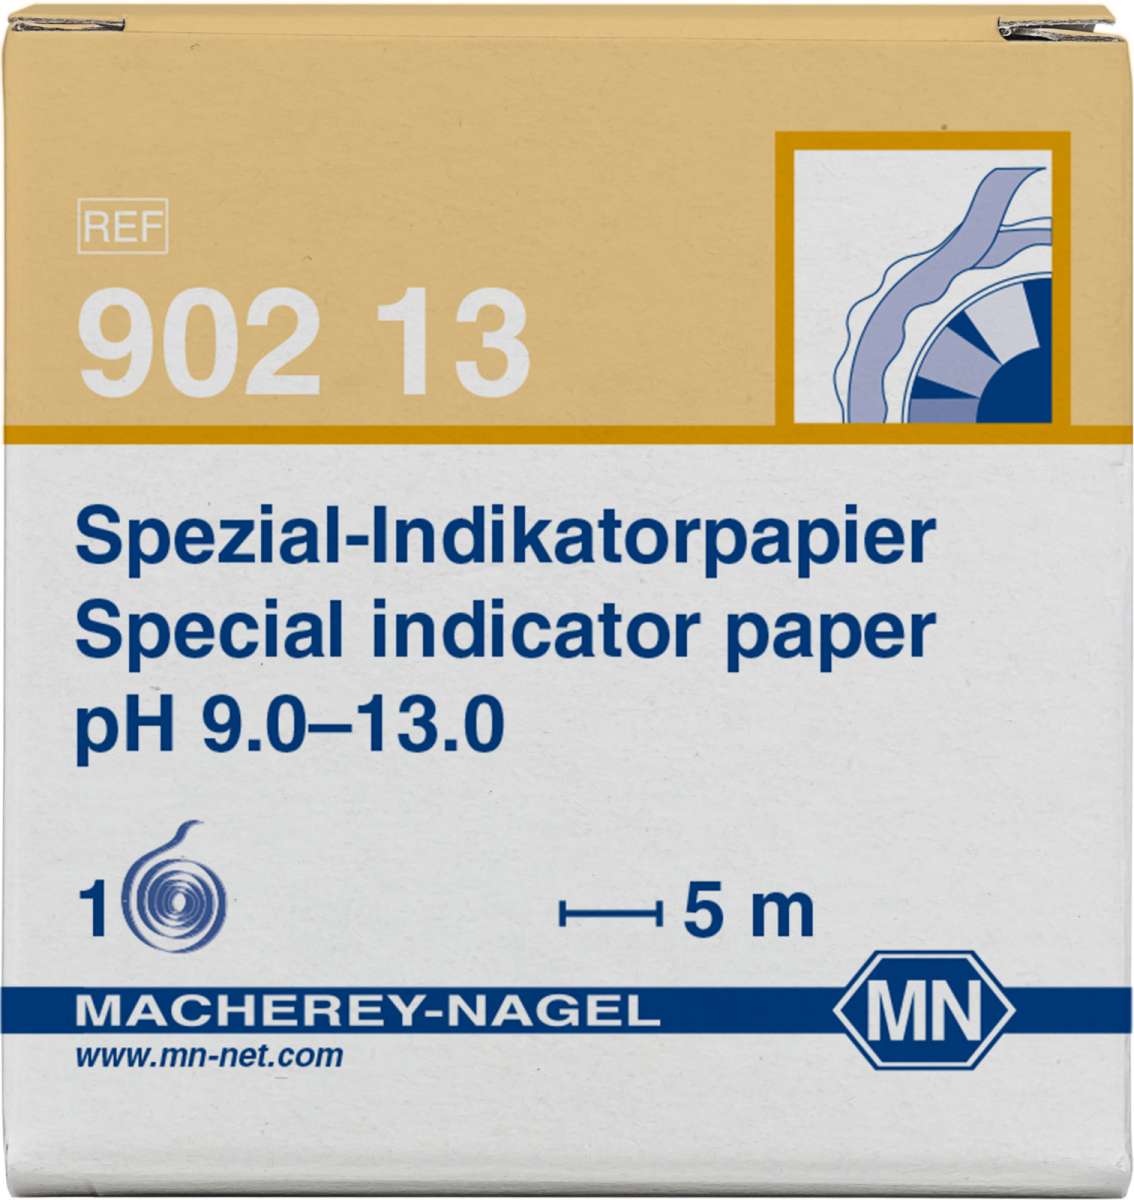 Special indicator paper pH 9.0 to 13.0 (Reel of 5m length and 7mm width)